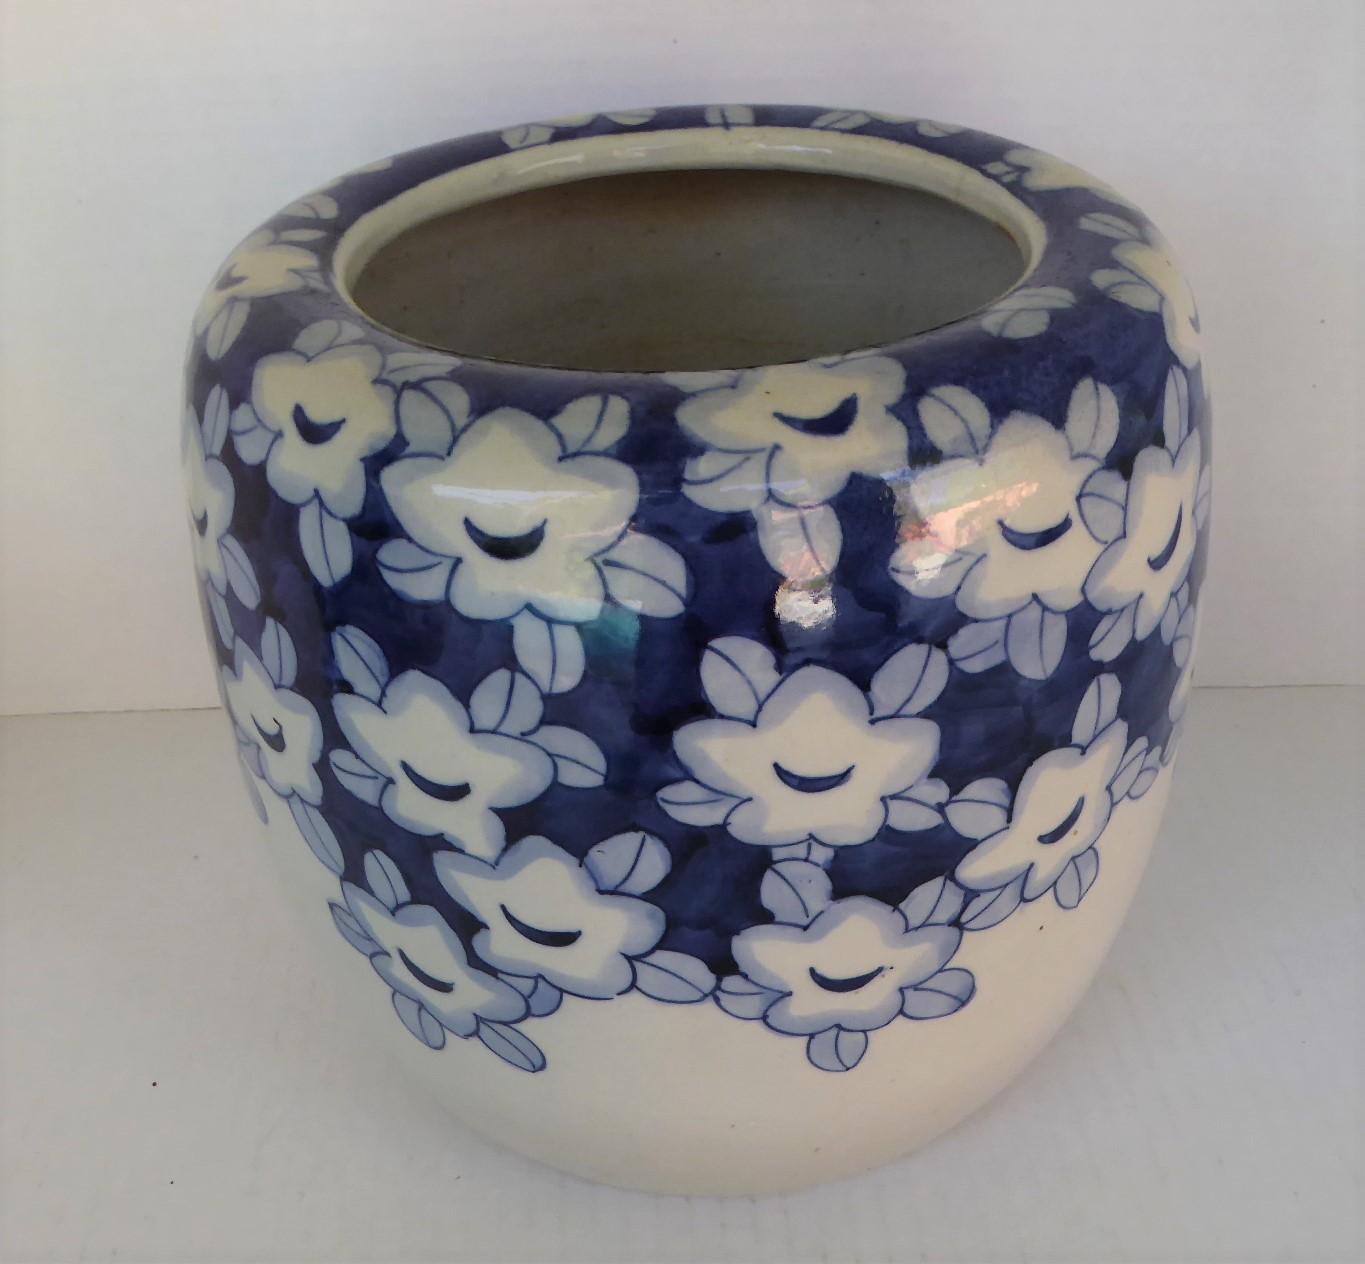 1950s Asian Modern earthenware Hibachi from Japan. Lovely decoration of blue and white large blooms with leaves, probably Plum or Peach blooms, signifying perseverance and hope. The flowers are like little faces enjoying the coming of spring,